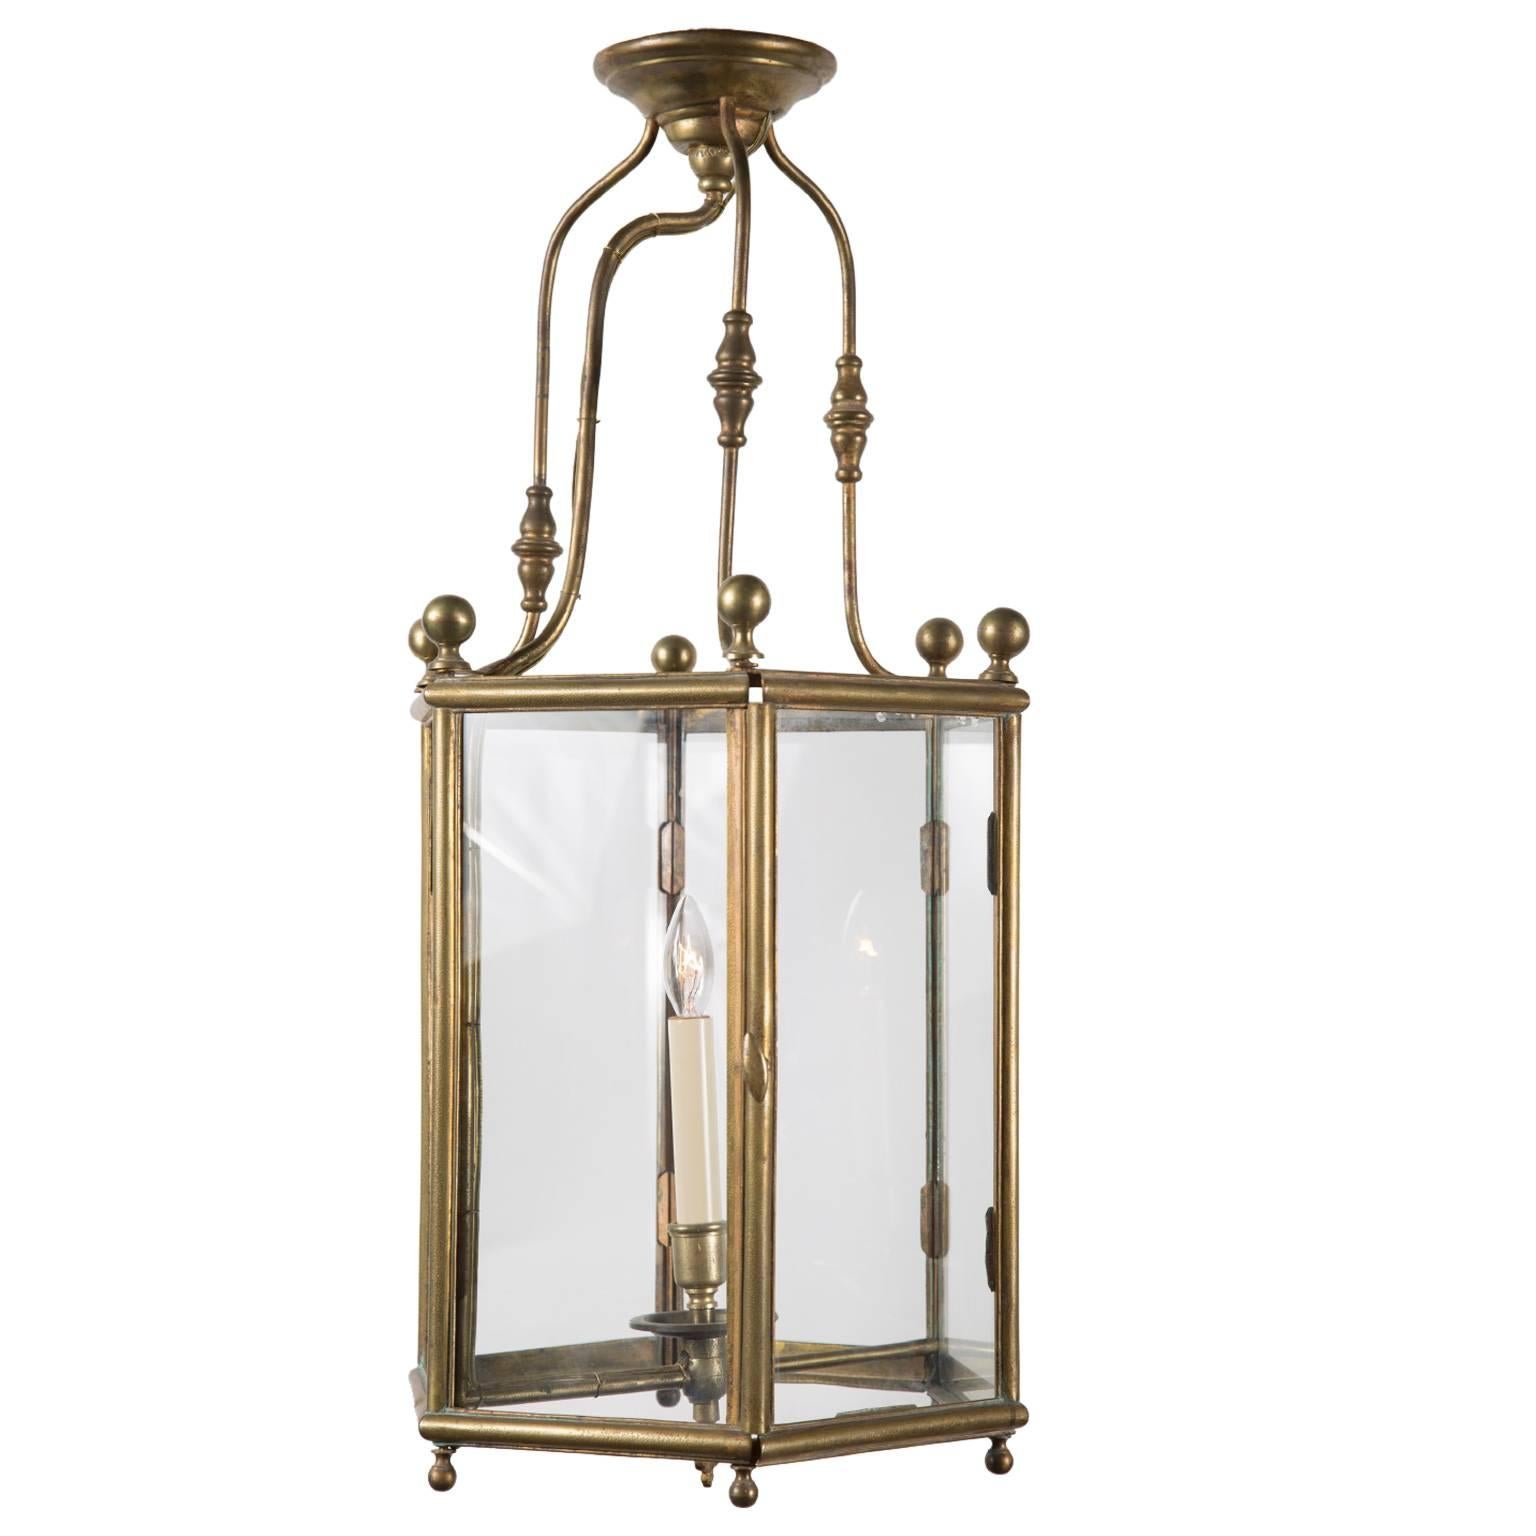 Antique Brass Hanging Lantern from 19th Century France